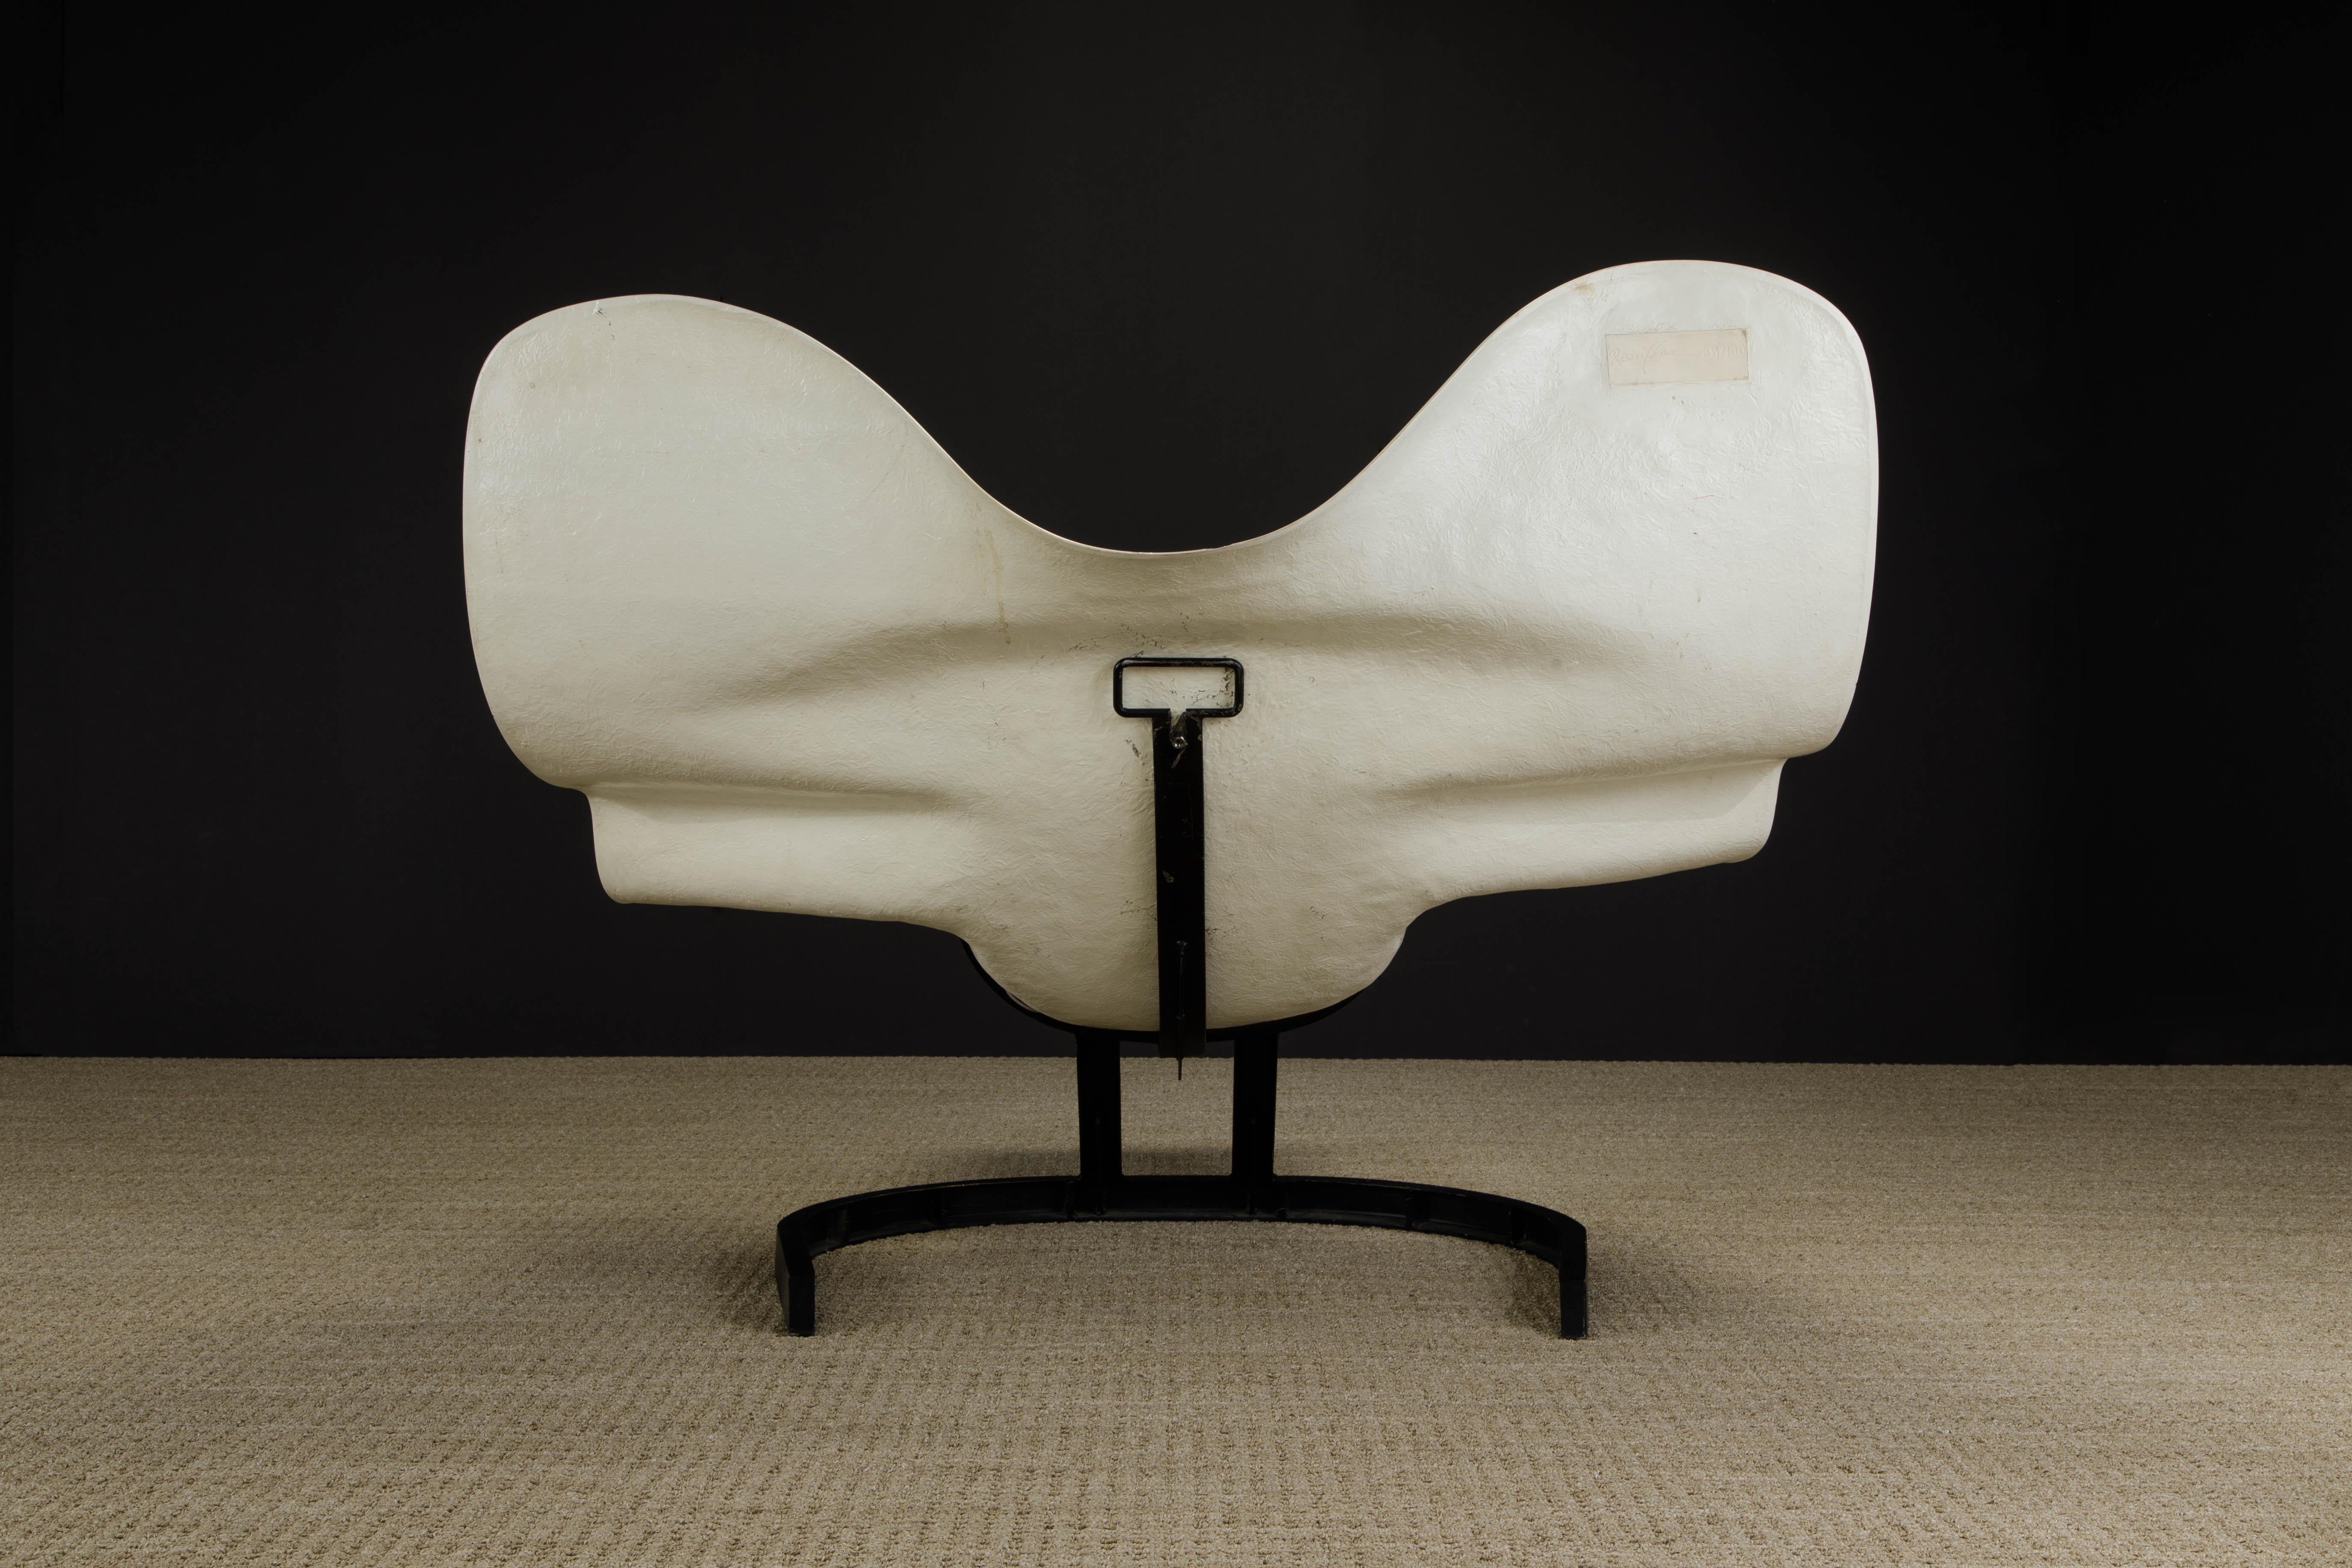 Limited Edition 'Elephant Chair' by Bernard Rancillac, 1985, Signed & Numbered 10